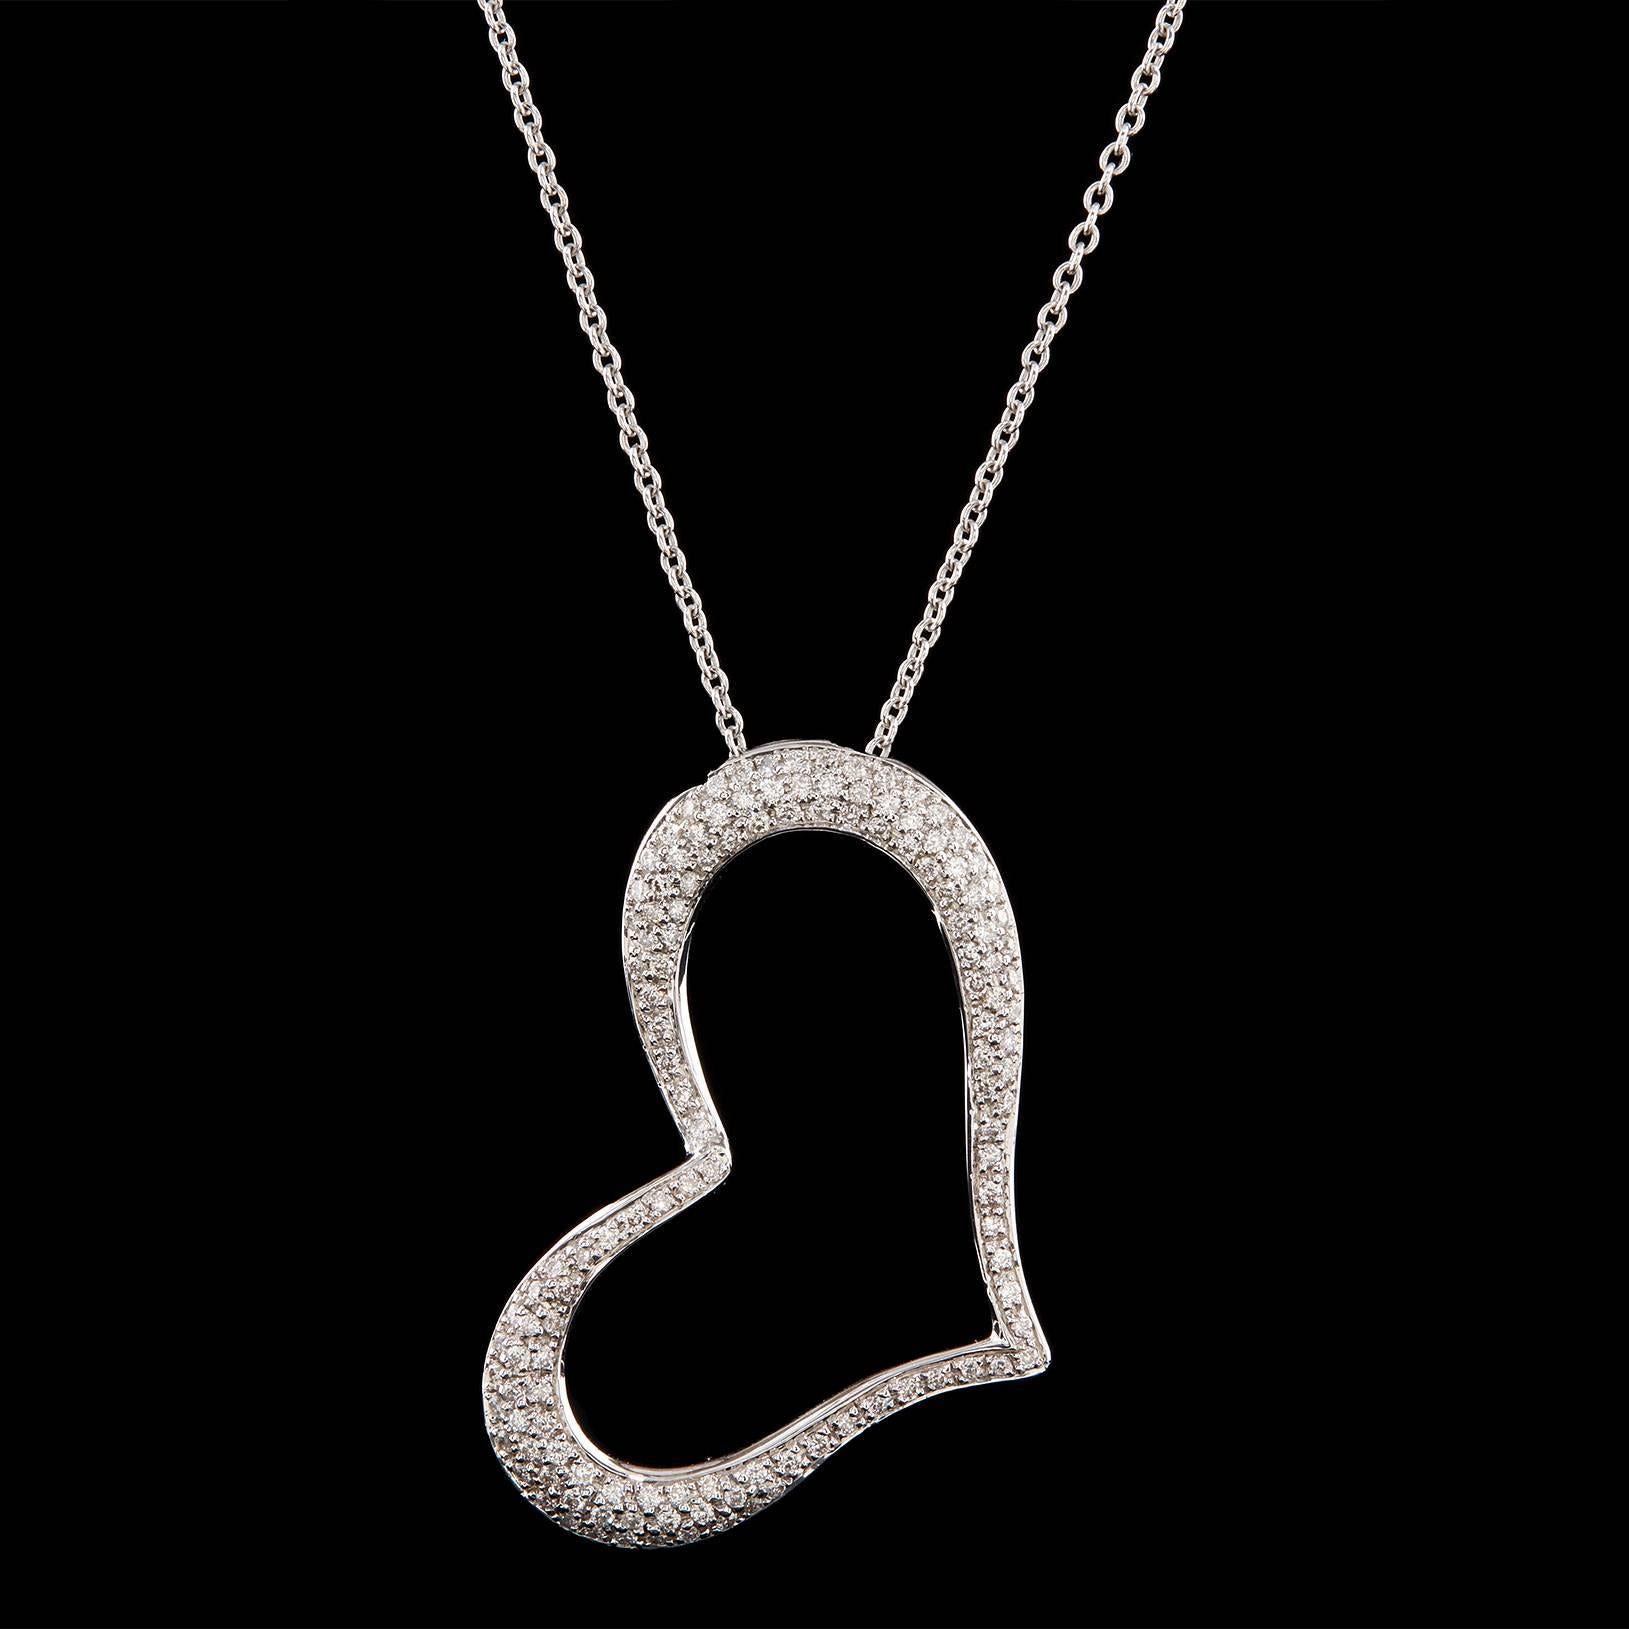 Contemporary 18k white gold Salavetti necklace featuring a heart pendant pavé-set with round brilliant cut diamonds totaling 0.78cttw, suspended from an 18 inch cable link chain that can be worn at different lengths.  This piece weighs 8.4 grams. 